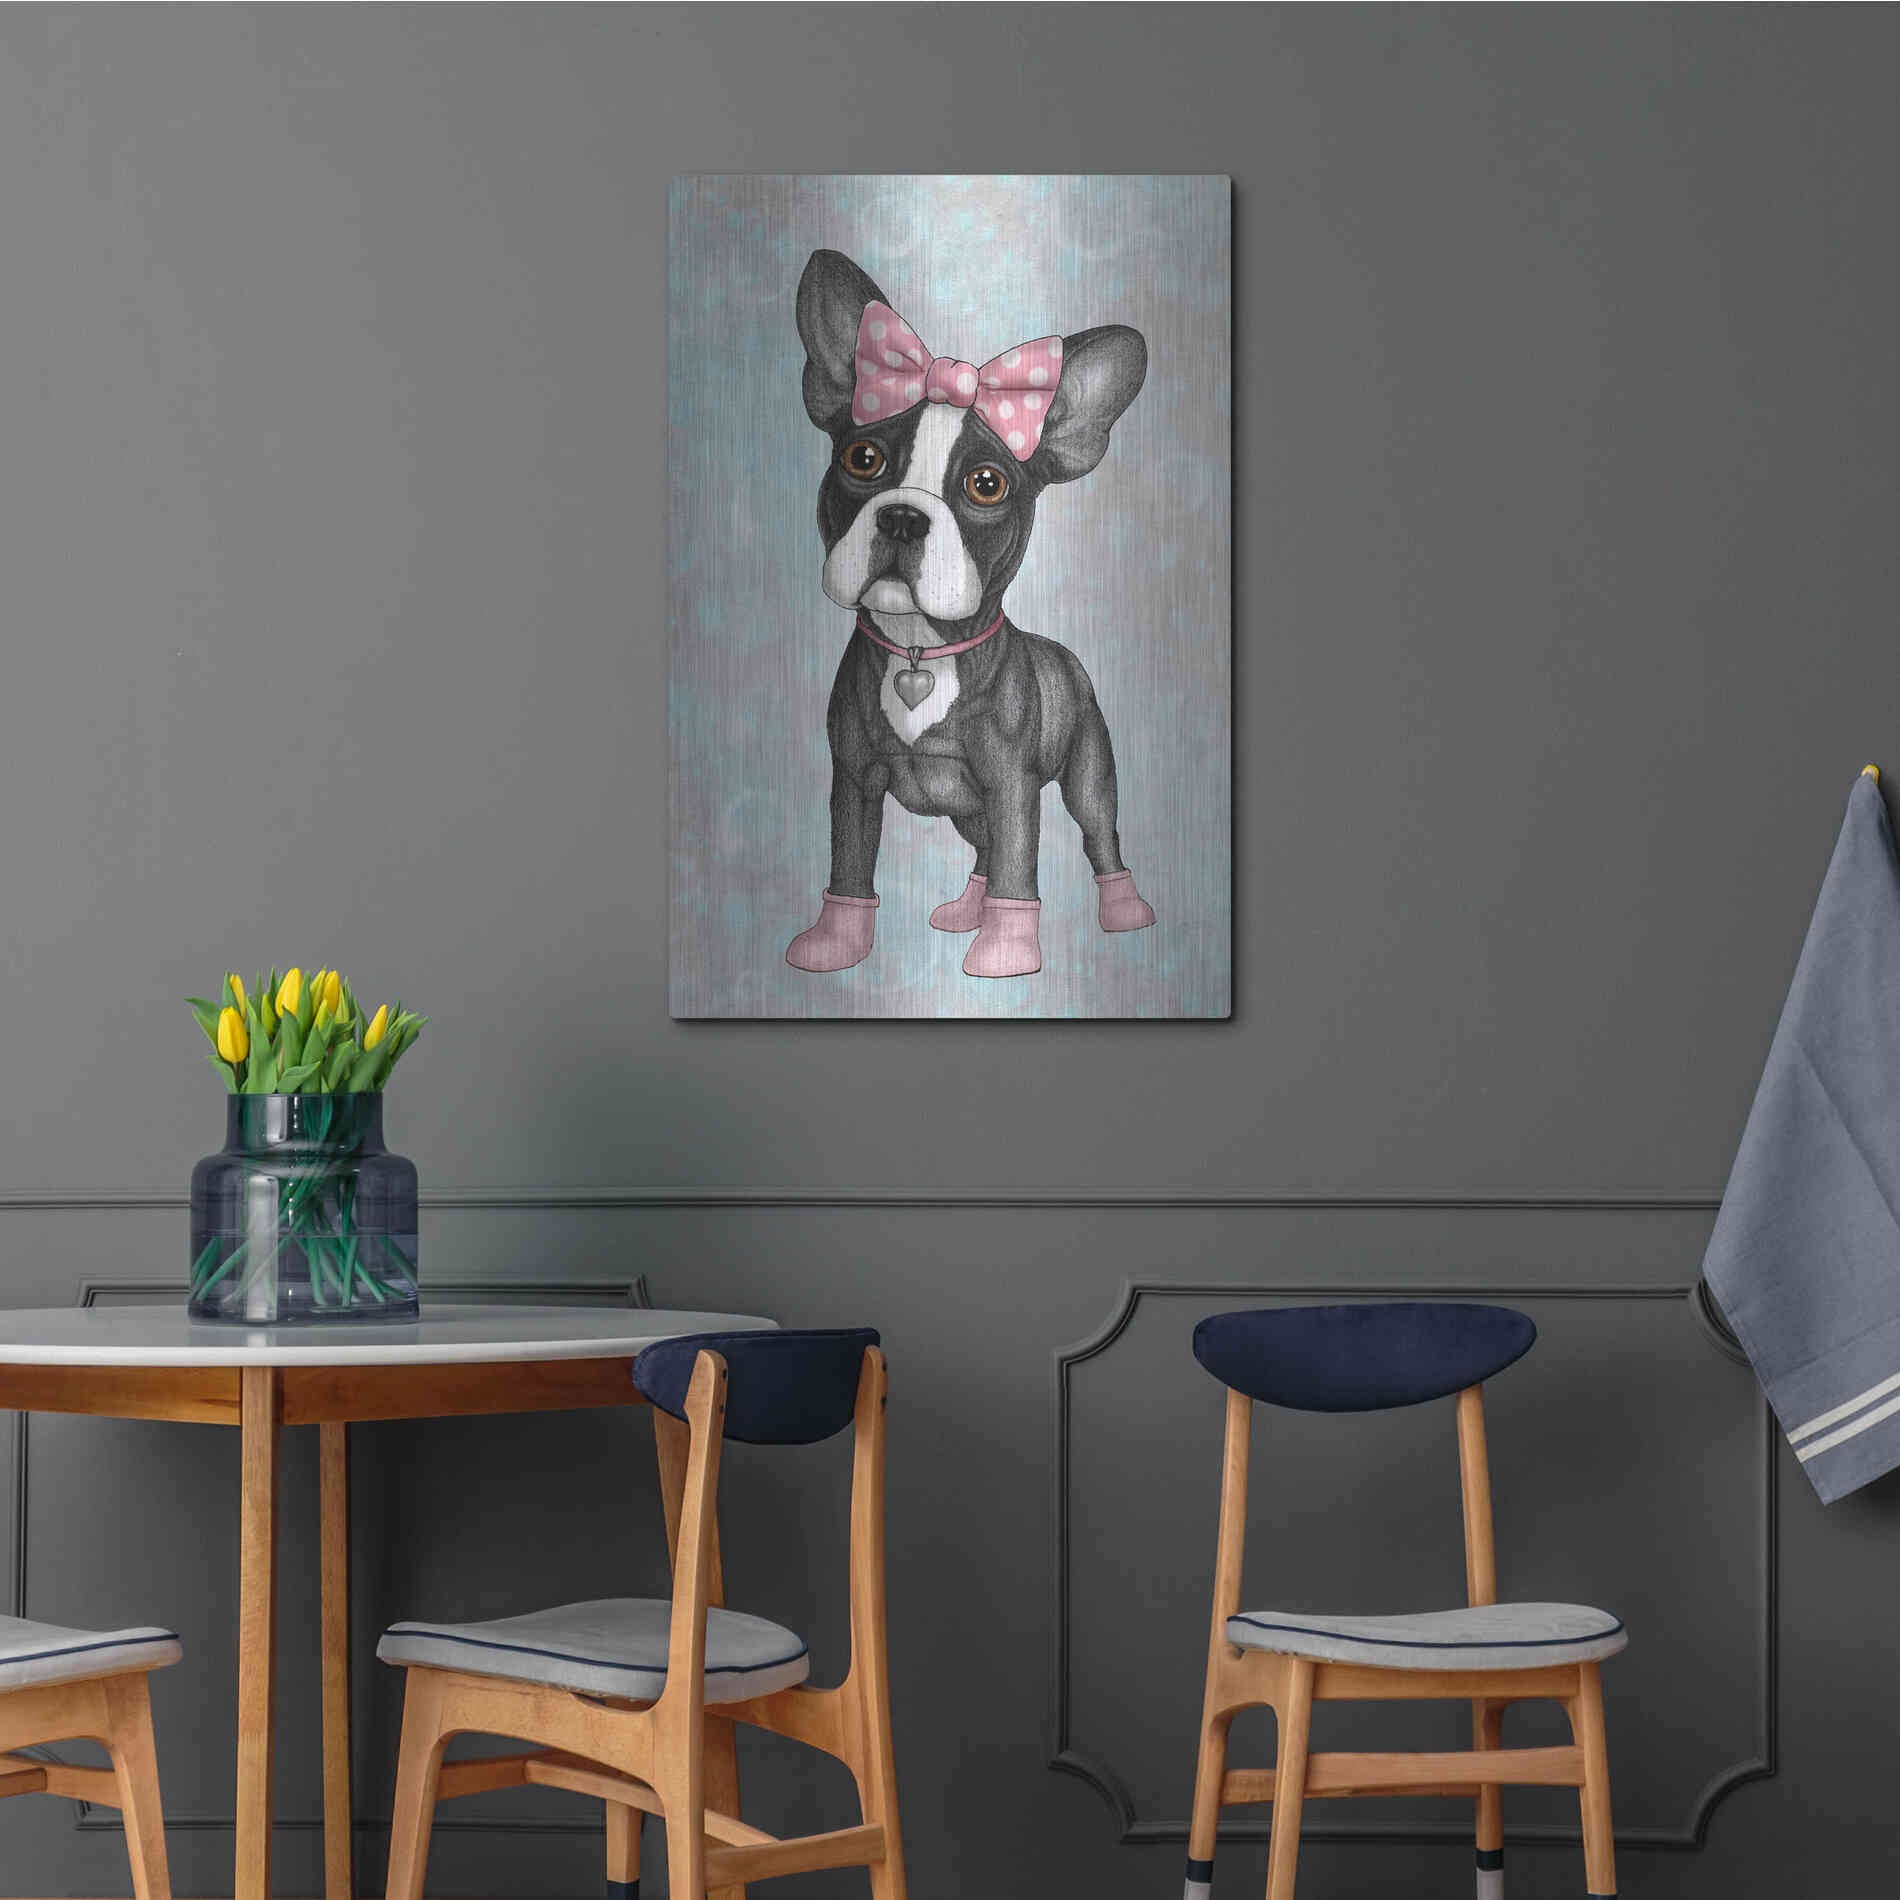 Luxe Metal Art 'Sweet Frenchie' by Barruf Metal Wall Art,24x36